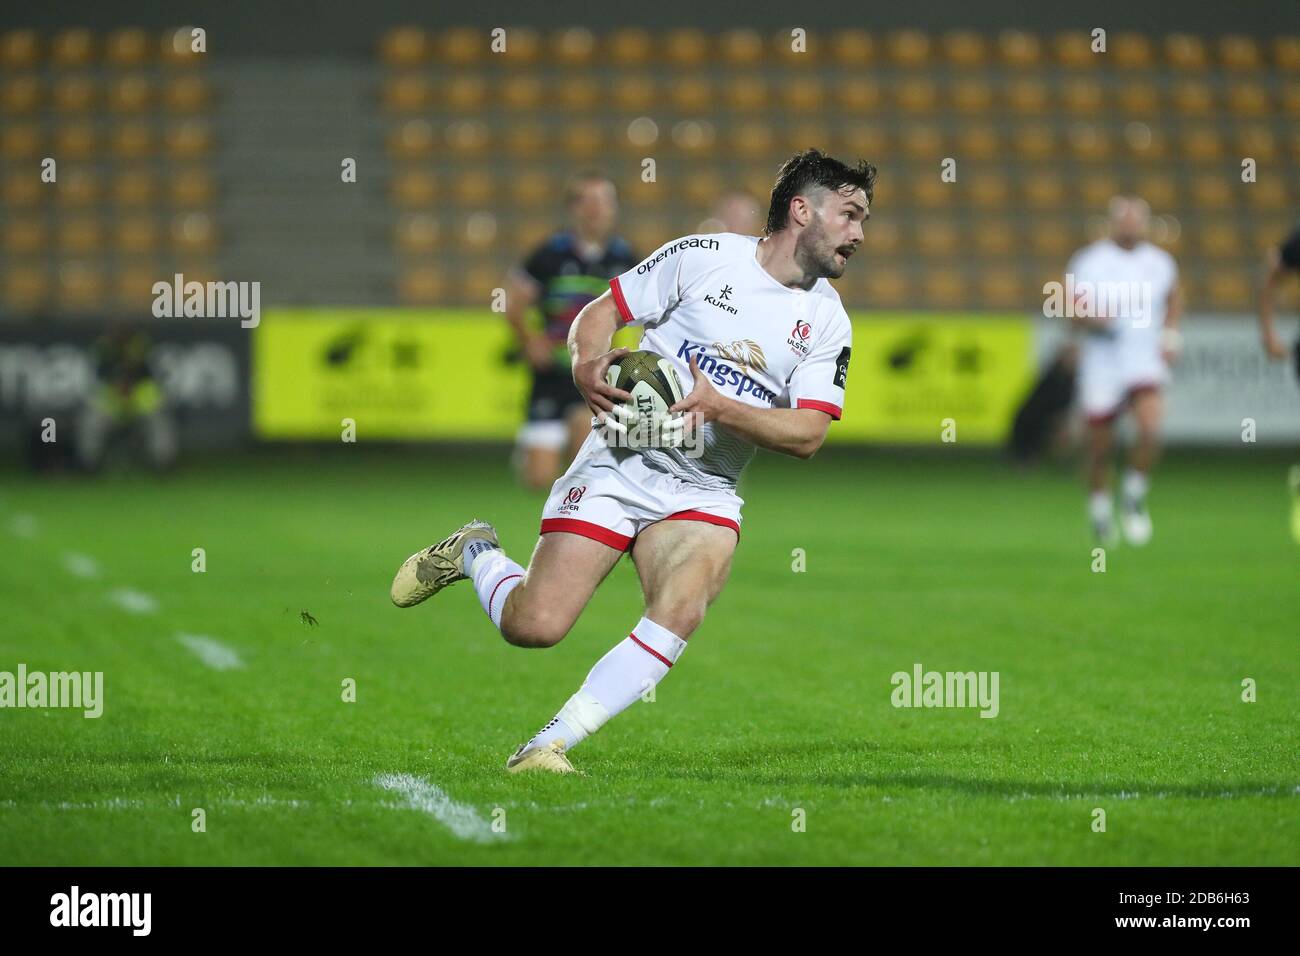 Sergio Lanfranchi stadium, Parma, Italy, 16 Nov 2020, Bill Johnston (Ulster) during Zebre Rugby vs Ulster Rugby, Rugby Guinness Pro 14 match - Photo Massimiliano Carnabuci / LM Stock Photo